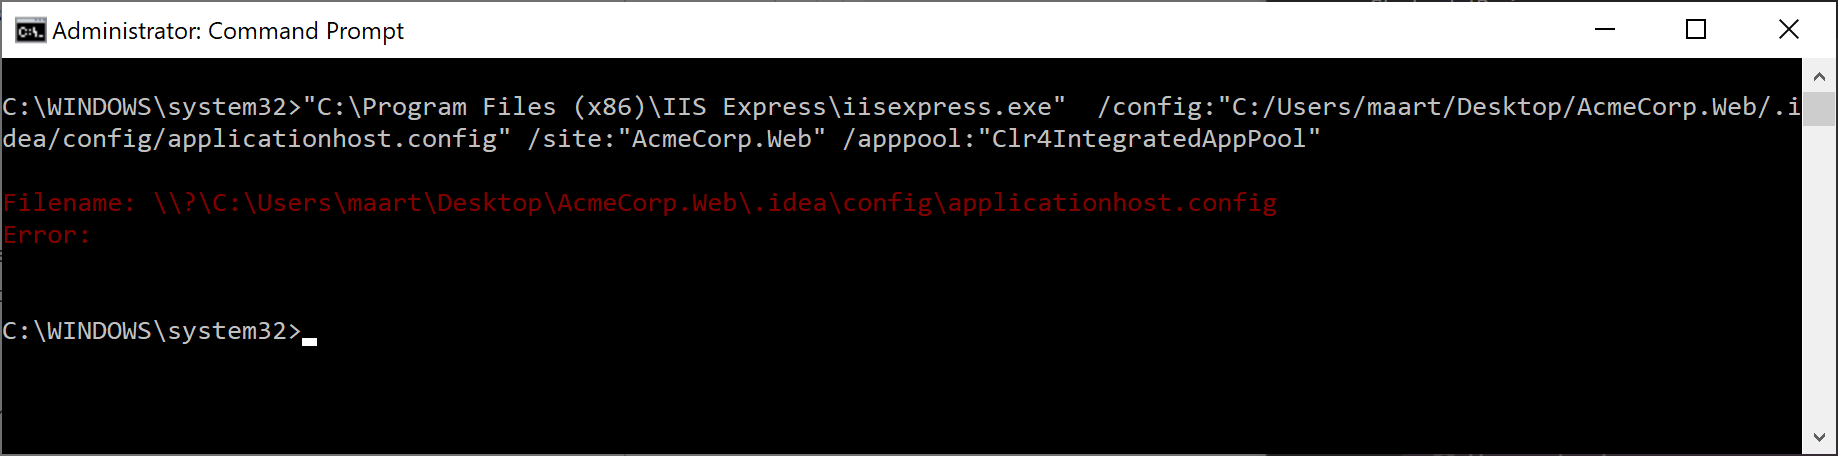 IIS Express errors out on ASP.NET Core with no details